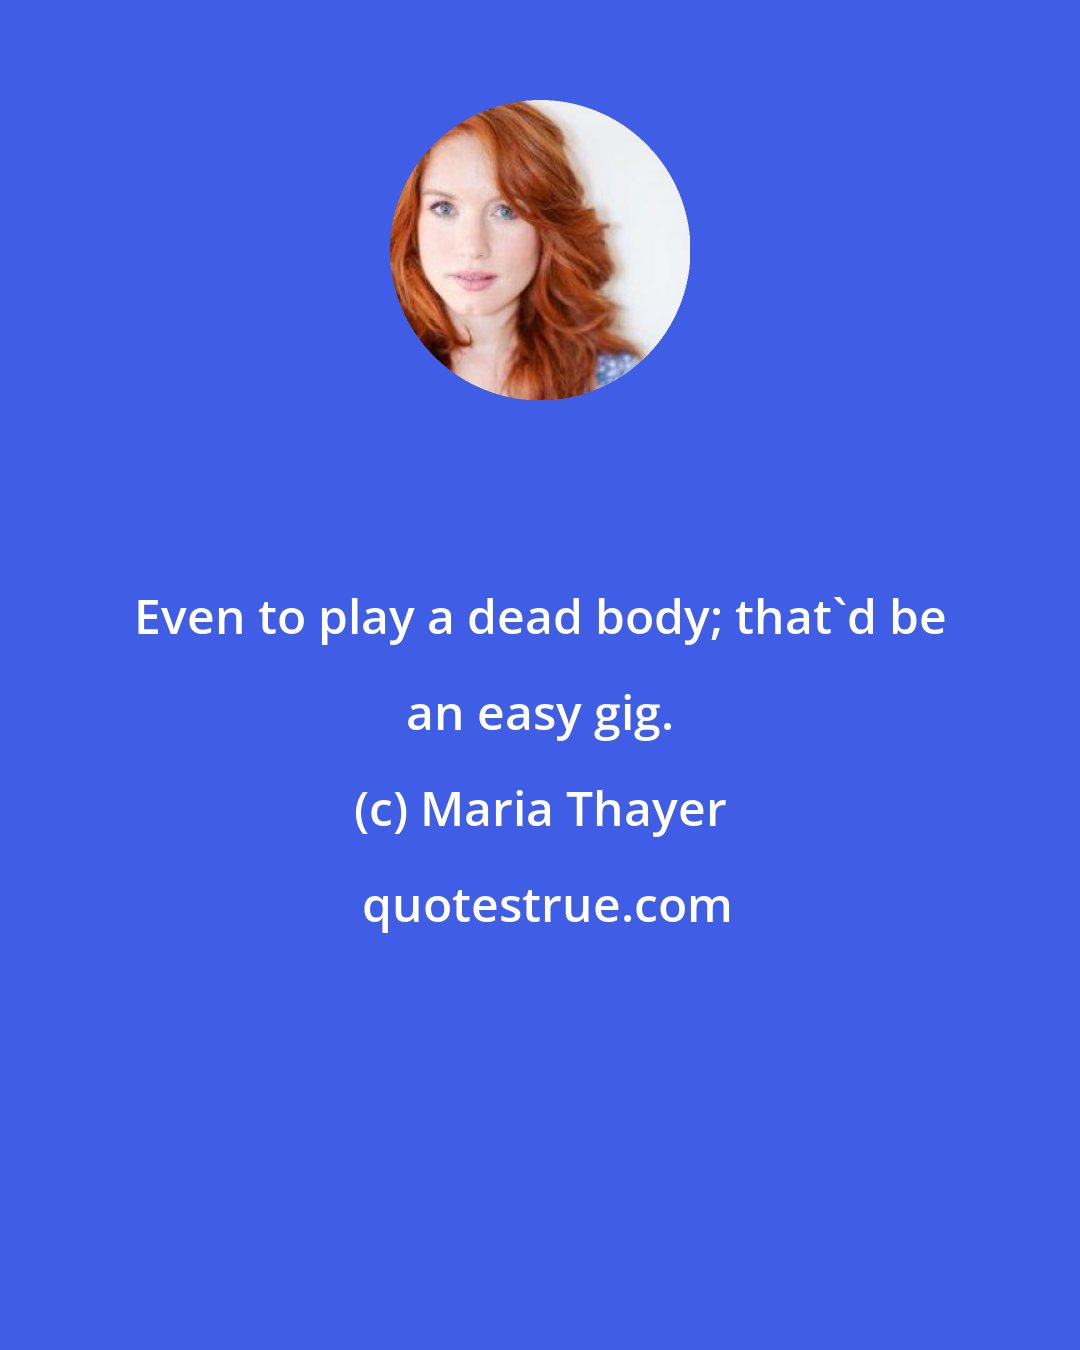 Maria Thayer: Even to play a dead body; that'd be an easy gig.